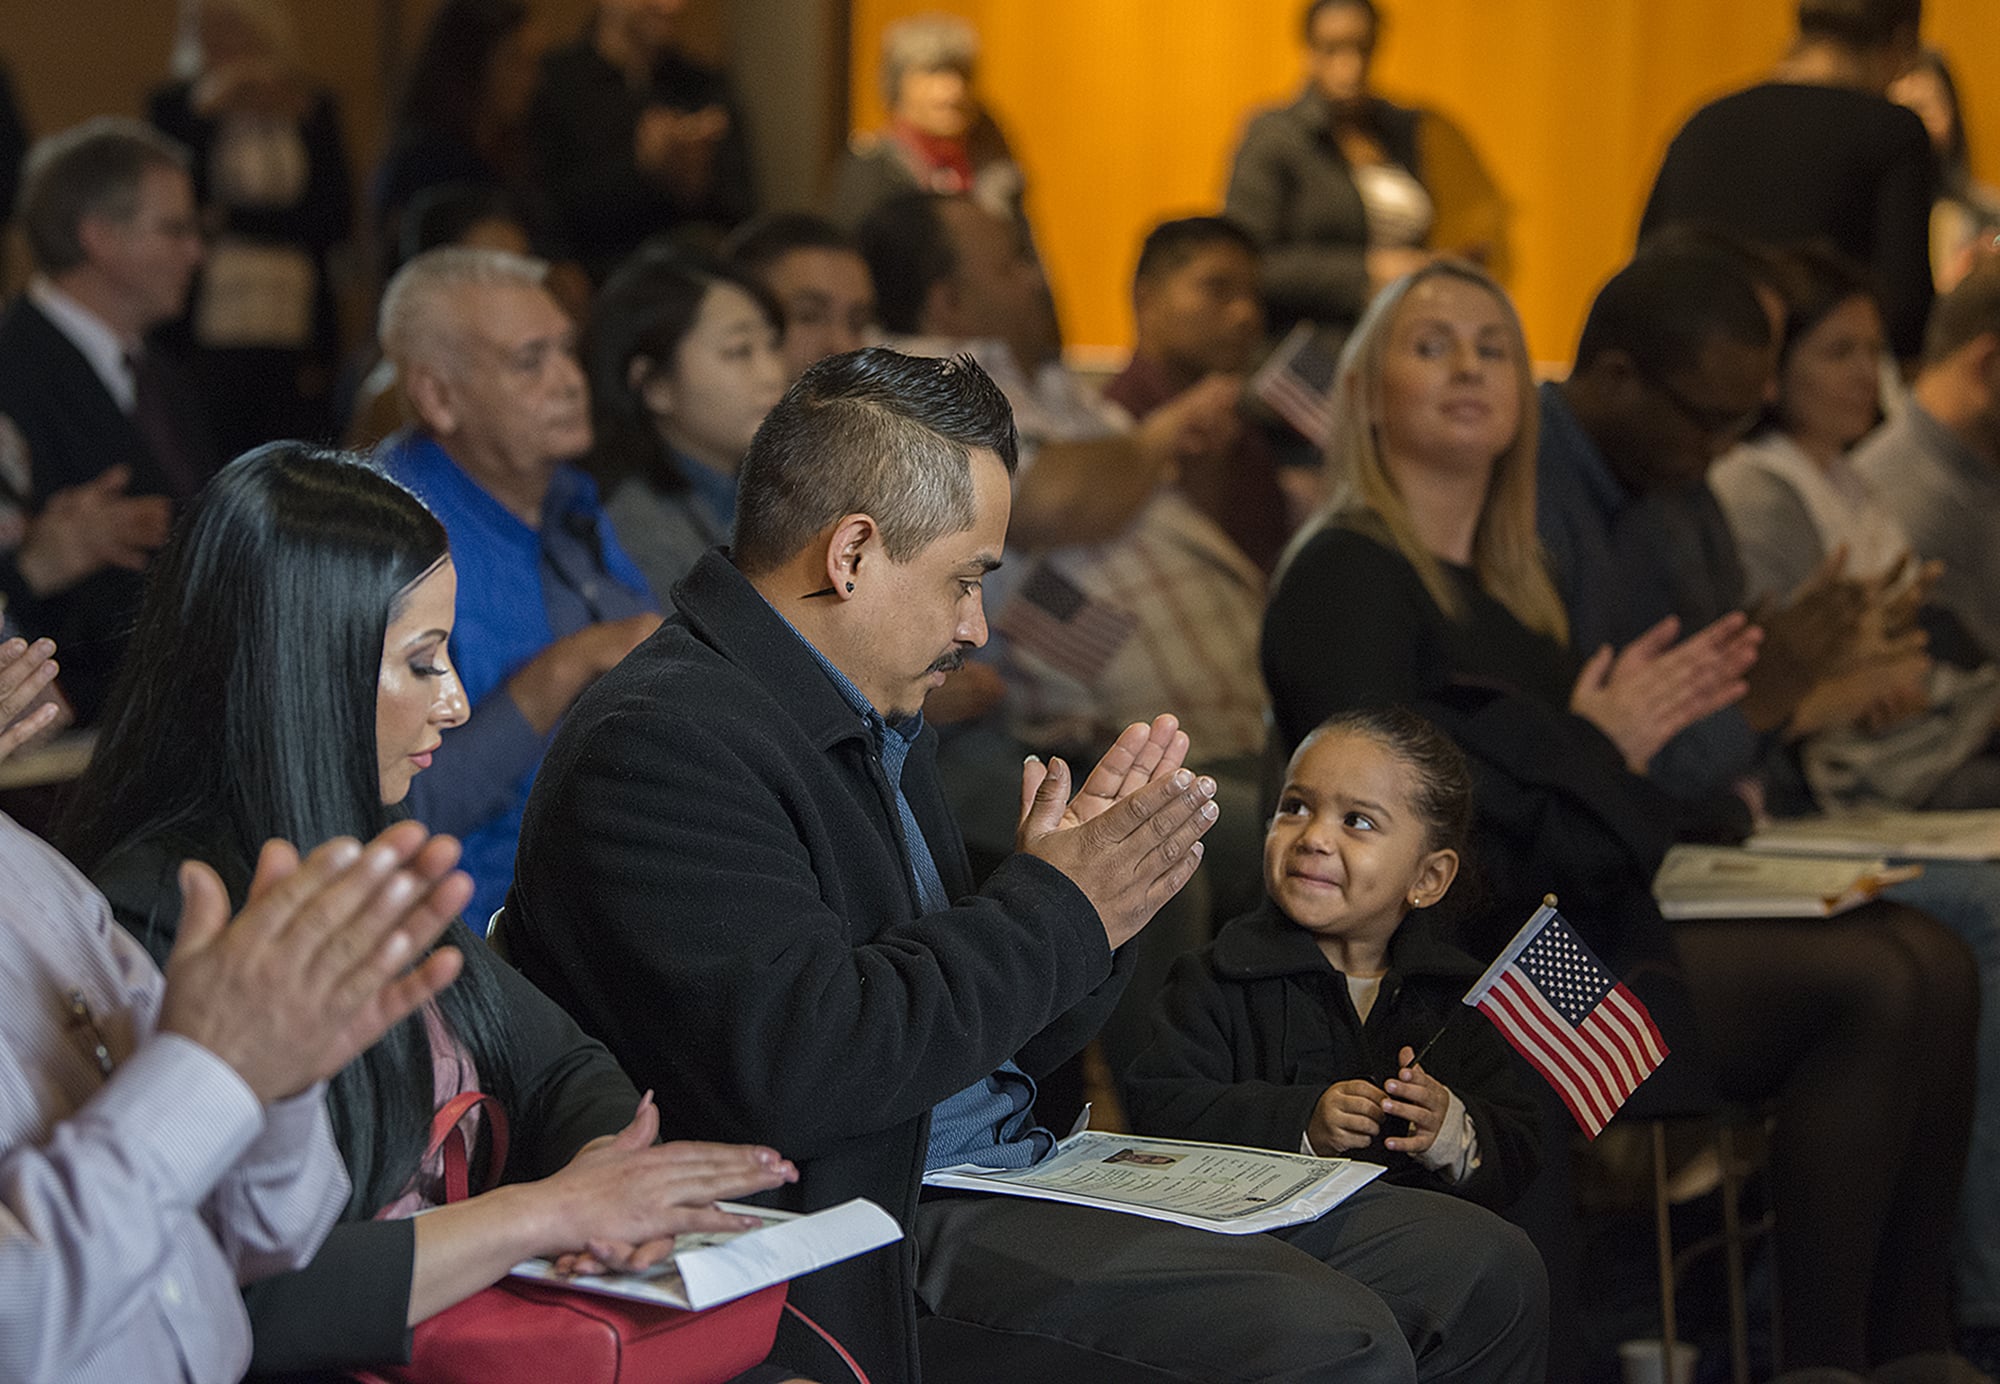 Gallery: Naturalization Ceremony photo gallery